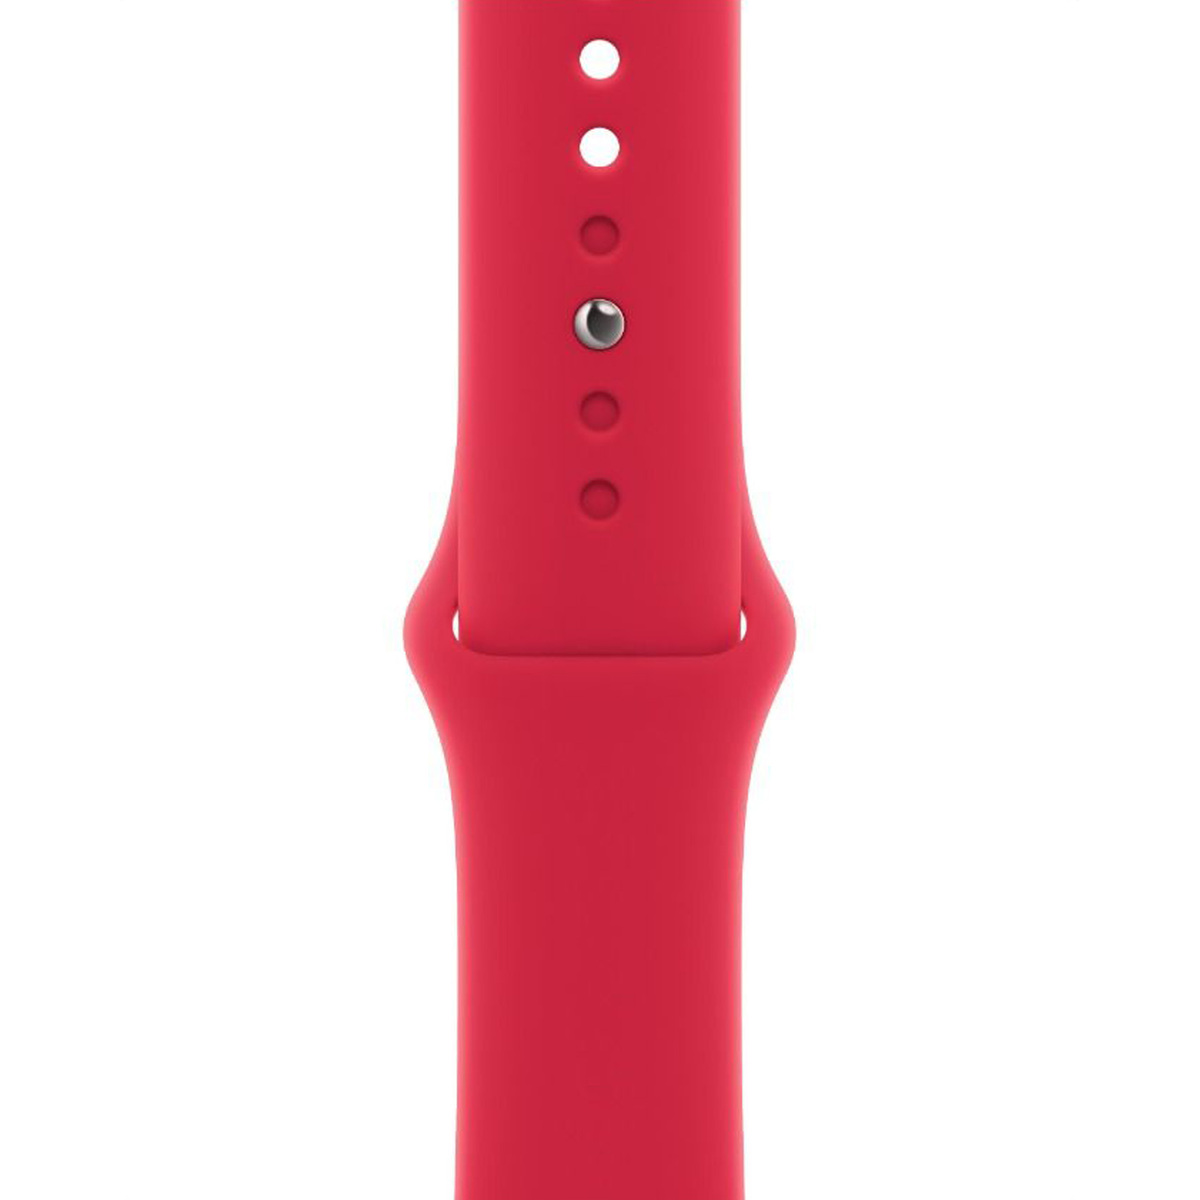 Apple Watch 41 mm Sport Band, Red, MP6Y3ZE/A